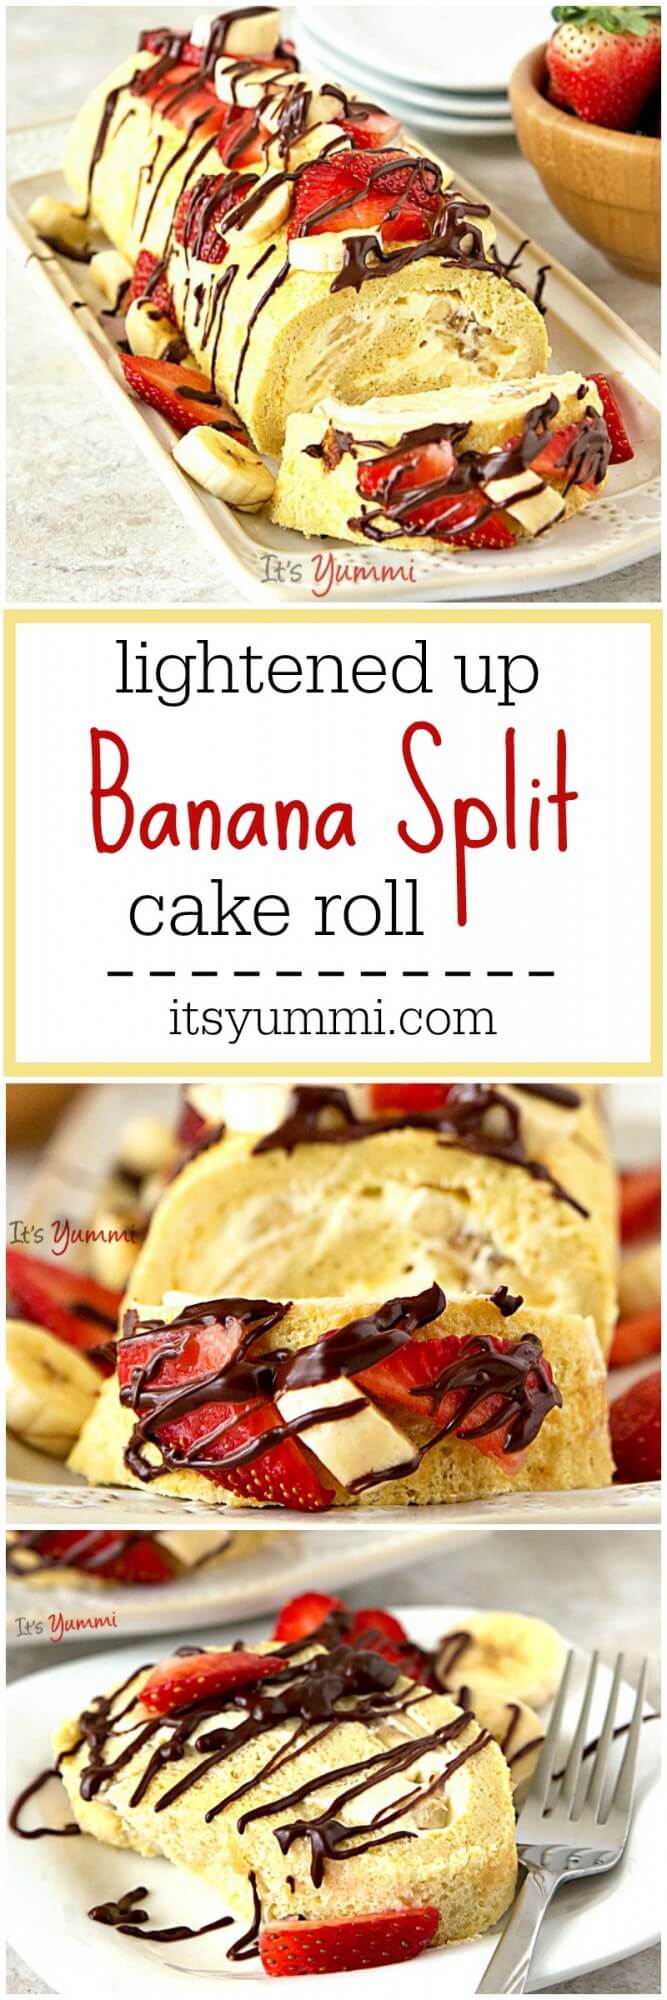 This Banana Split Cake Roll is one of the lightened up cake recipes that I've fallen in love with. Just 168 calories and 4 grams of fat per slice! Get the recipe on itsyummi.com